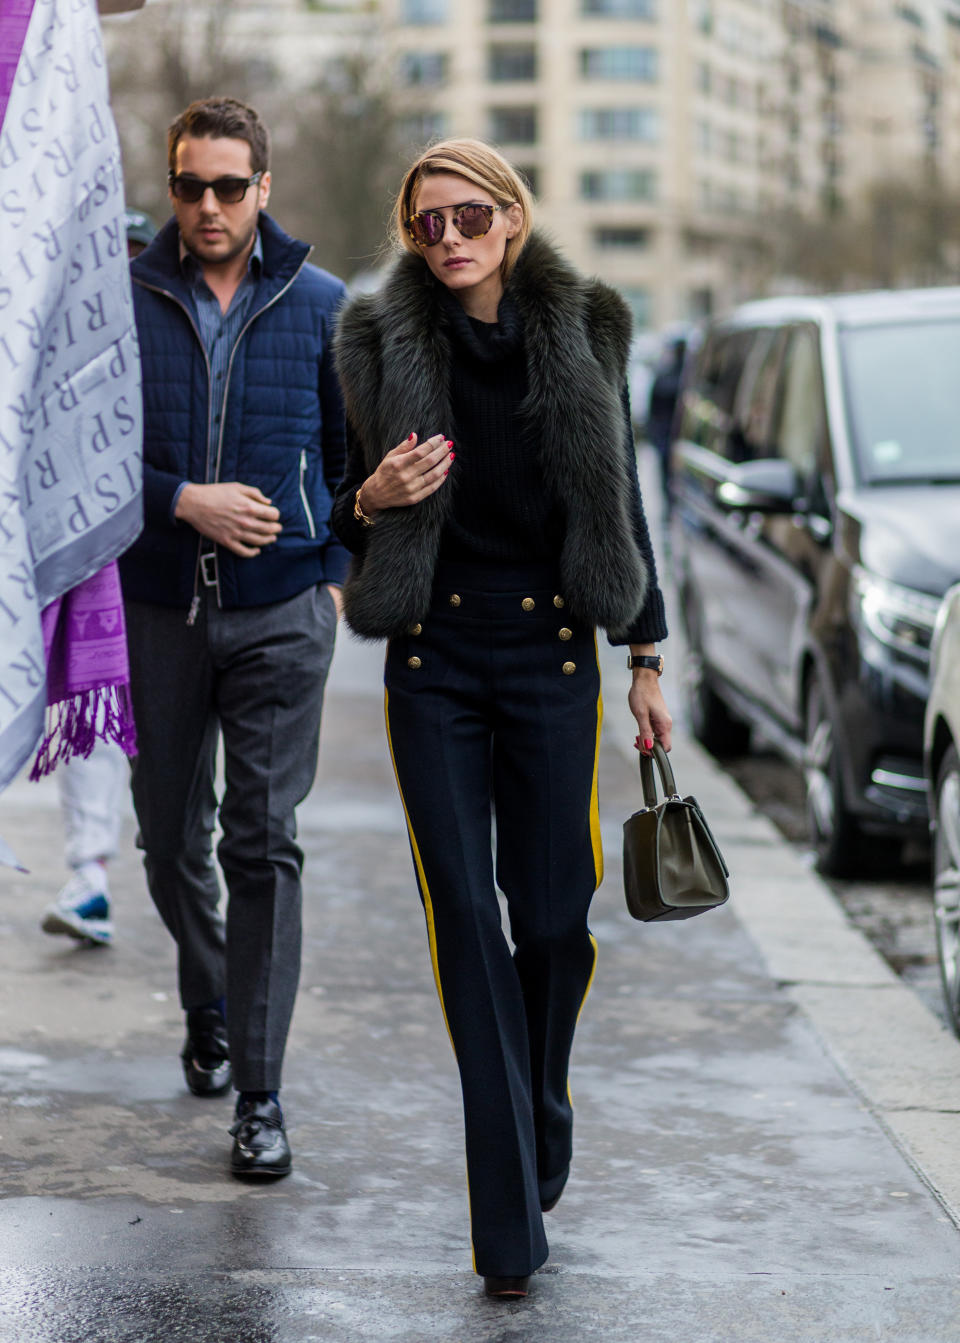 <strong>Olivia Palermo in Joseph and Elie Saab:</strong> Palermo strikes again, this time in a more minimalist outfit. The statement here is the (hopefully faux) fur shawl and the button details on her pants. While the look is understated,&nbsp;the fit and styling are spot-on, making it one outfit to remember.